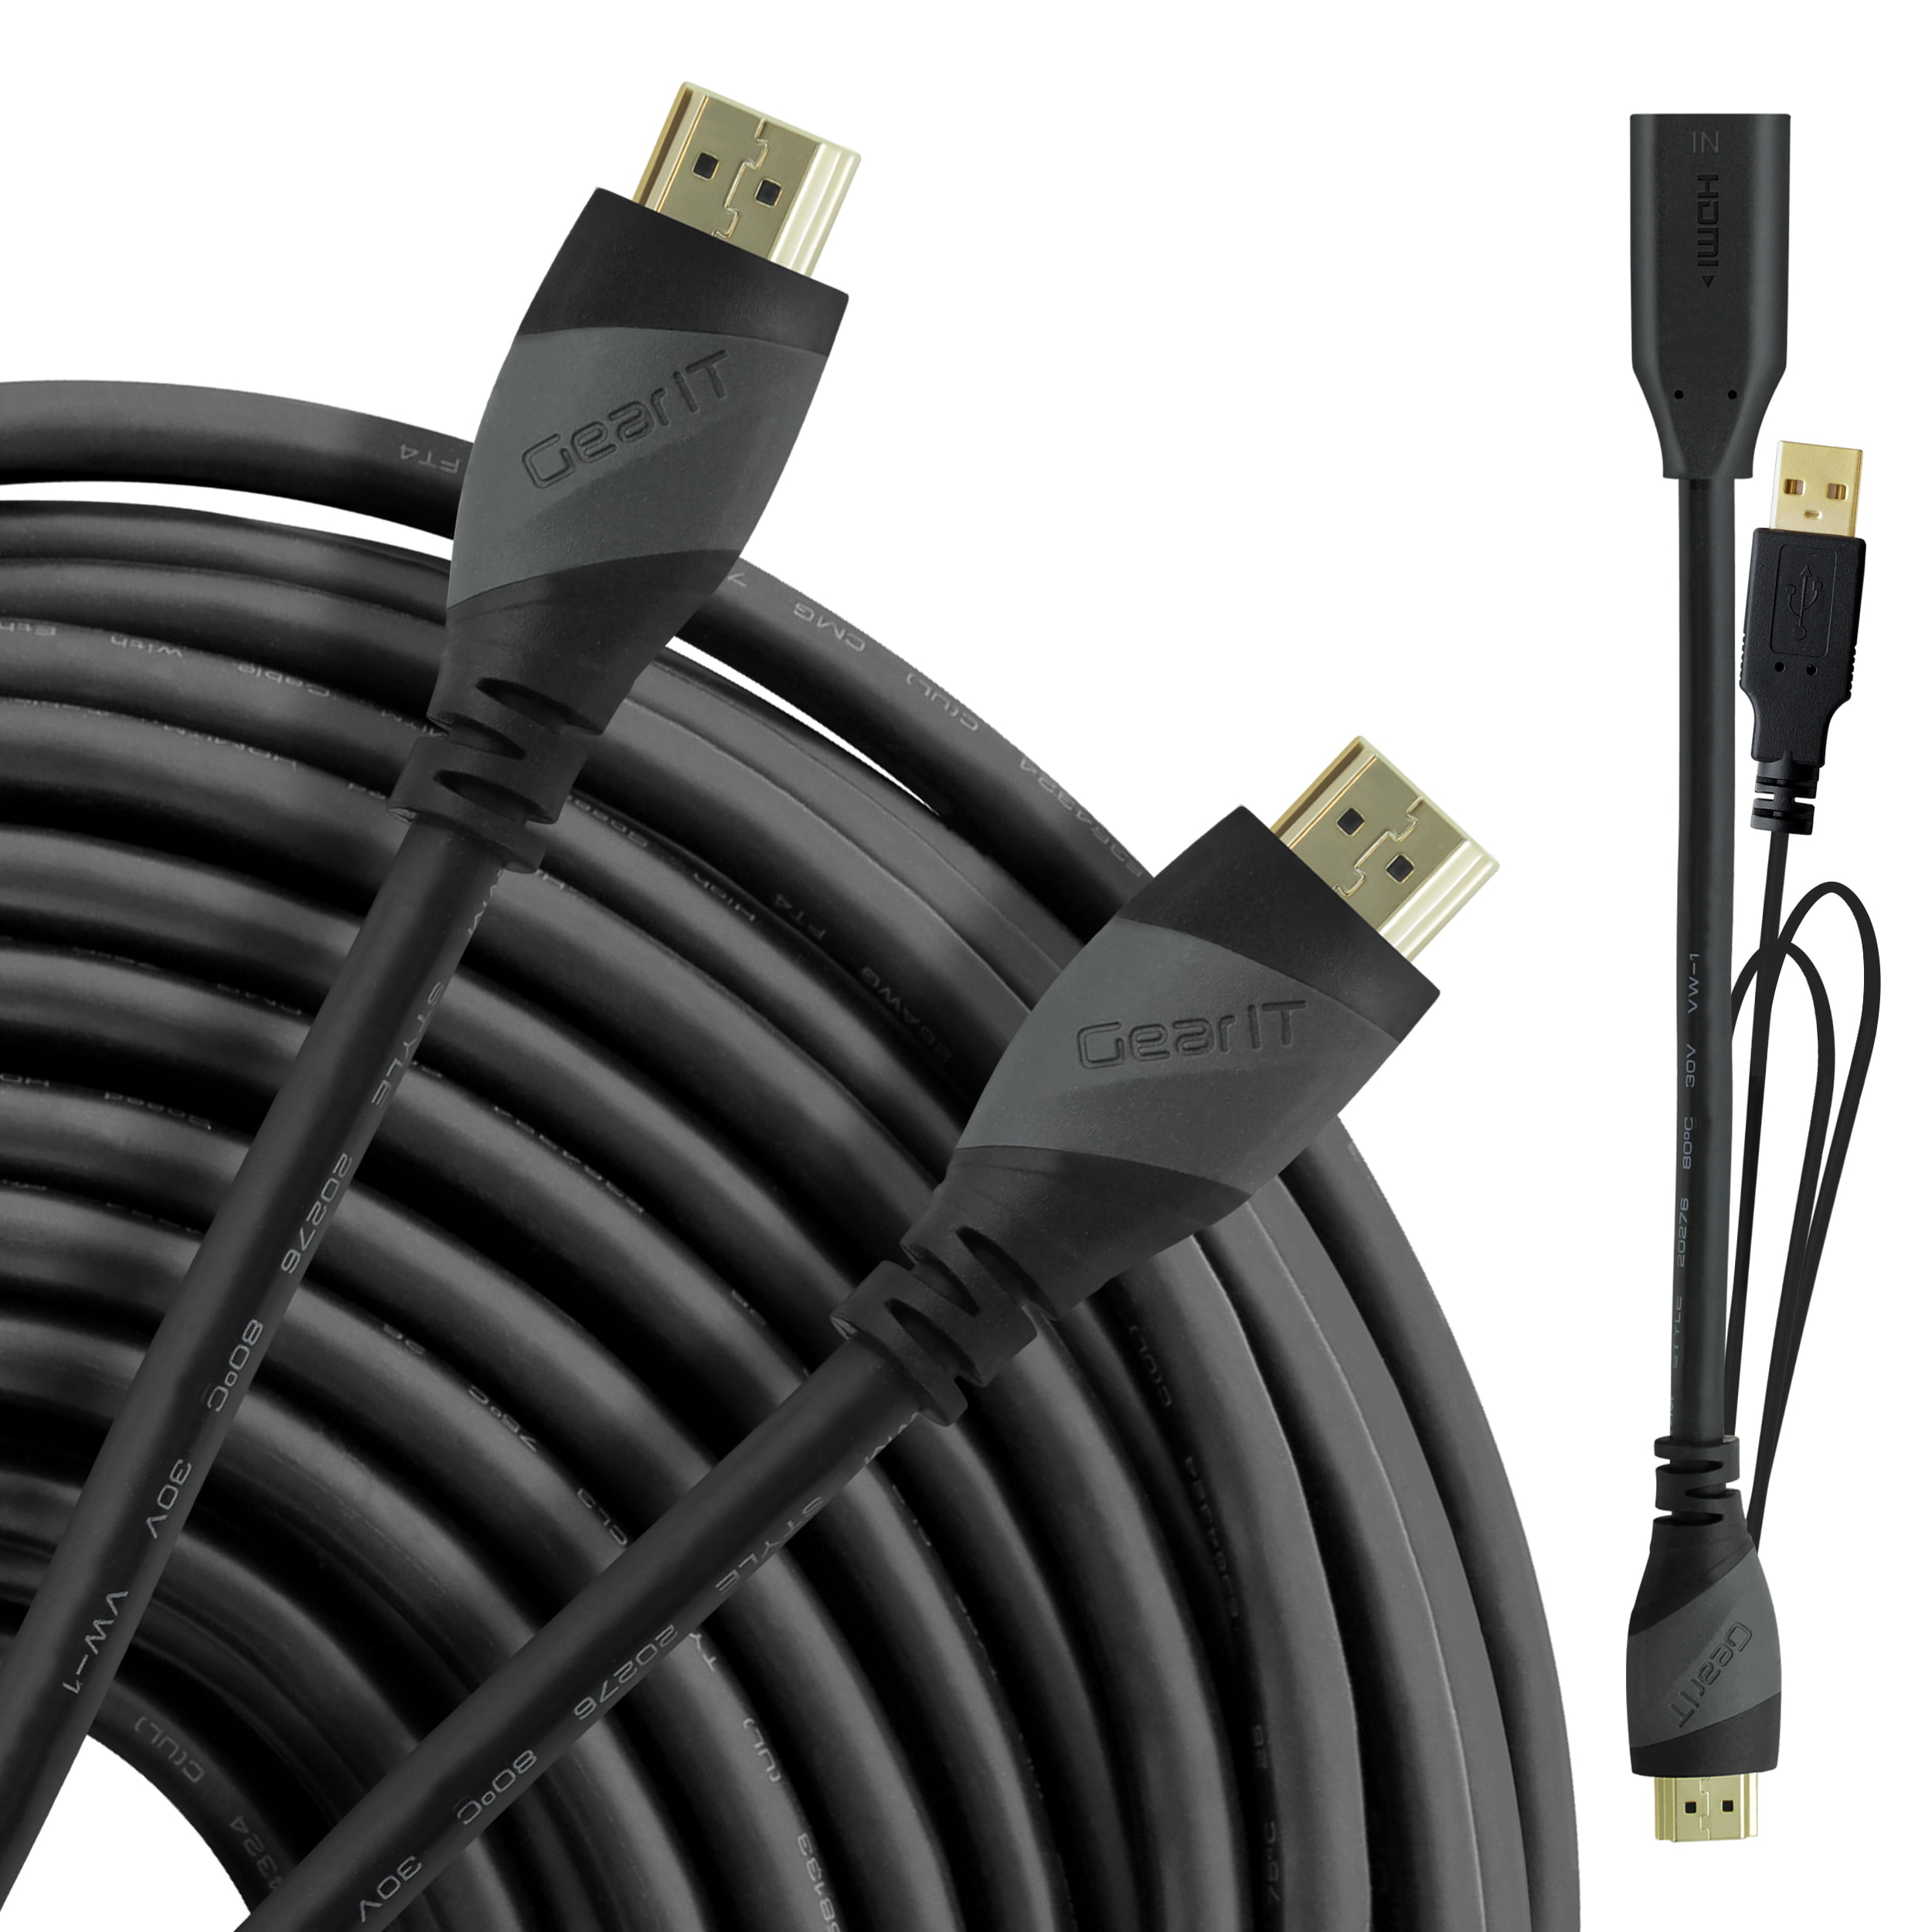 6 Feet CNE66159 UltraHD 4K Ready C/&E High Speed HDMI Cable Supports Ethernet 3D and Audio Return Latest Specification Cable